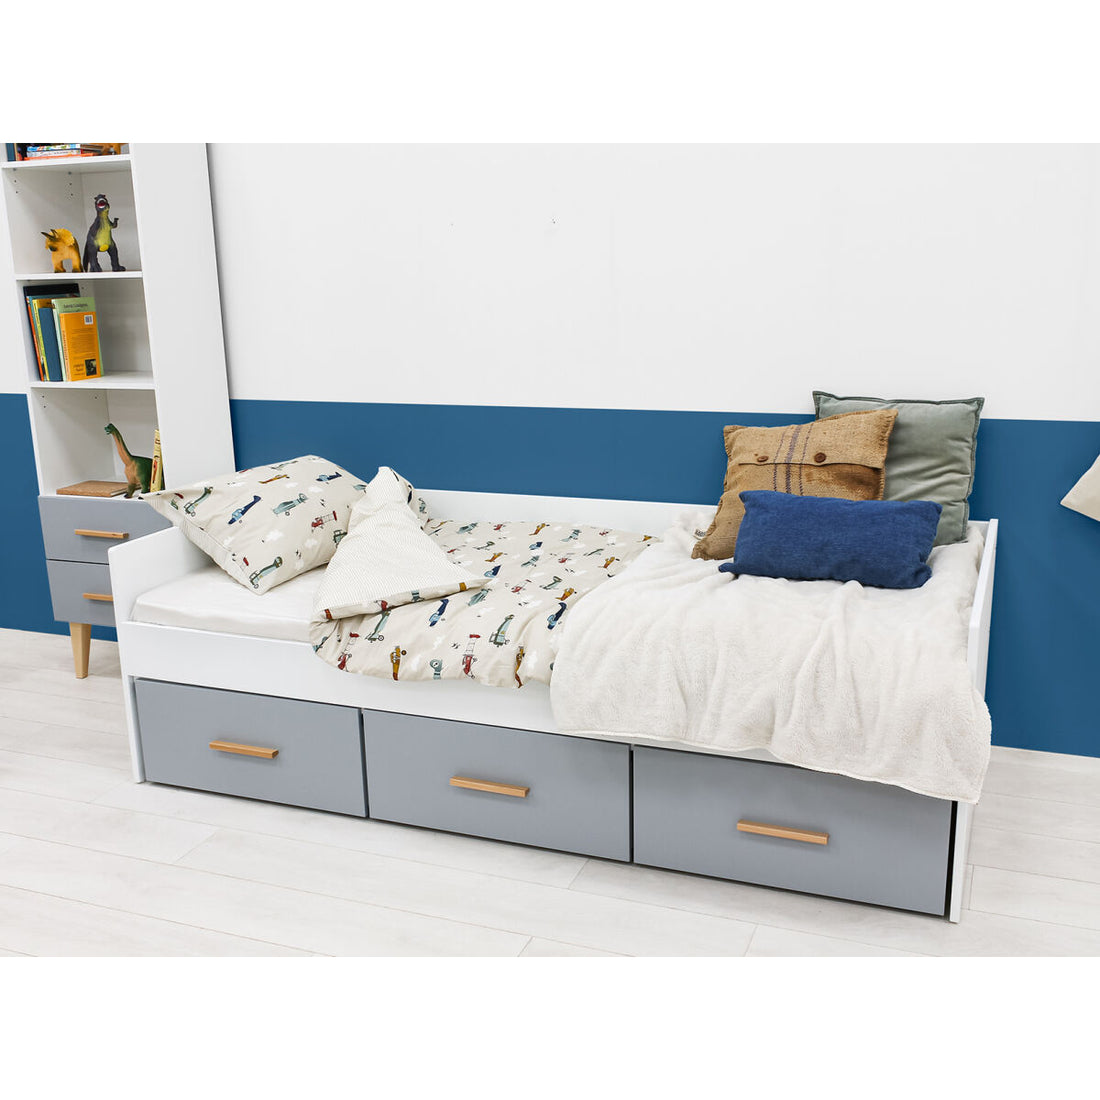 bopita-bench-bed-90x200-with-3-drawers-emma-white-grey-with-bed-base-bopt-17090200-bopt-26920961-set- (10)